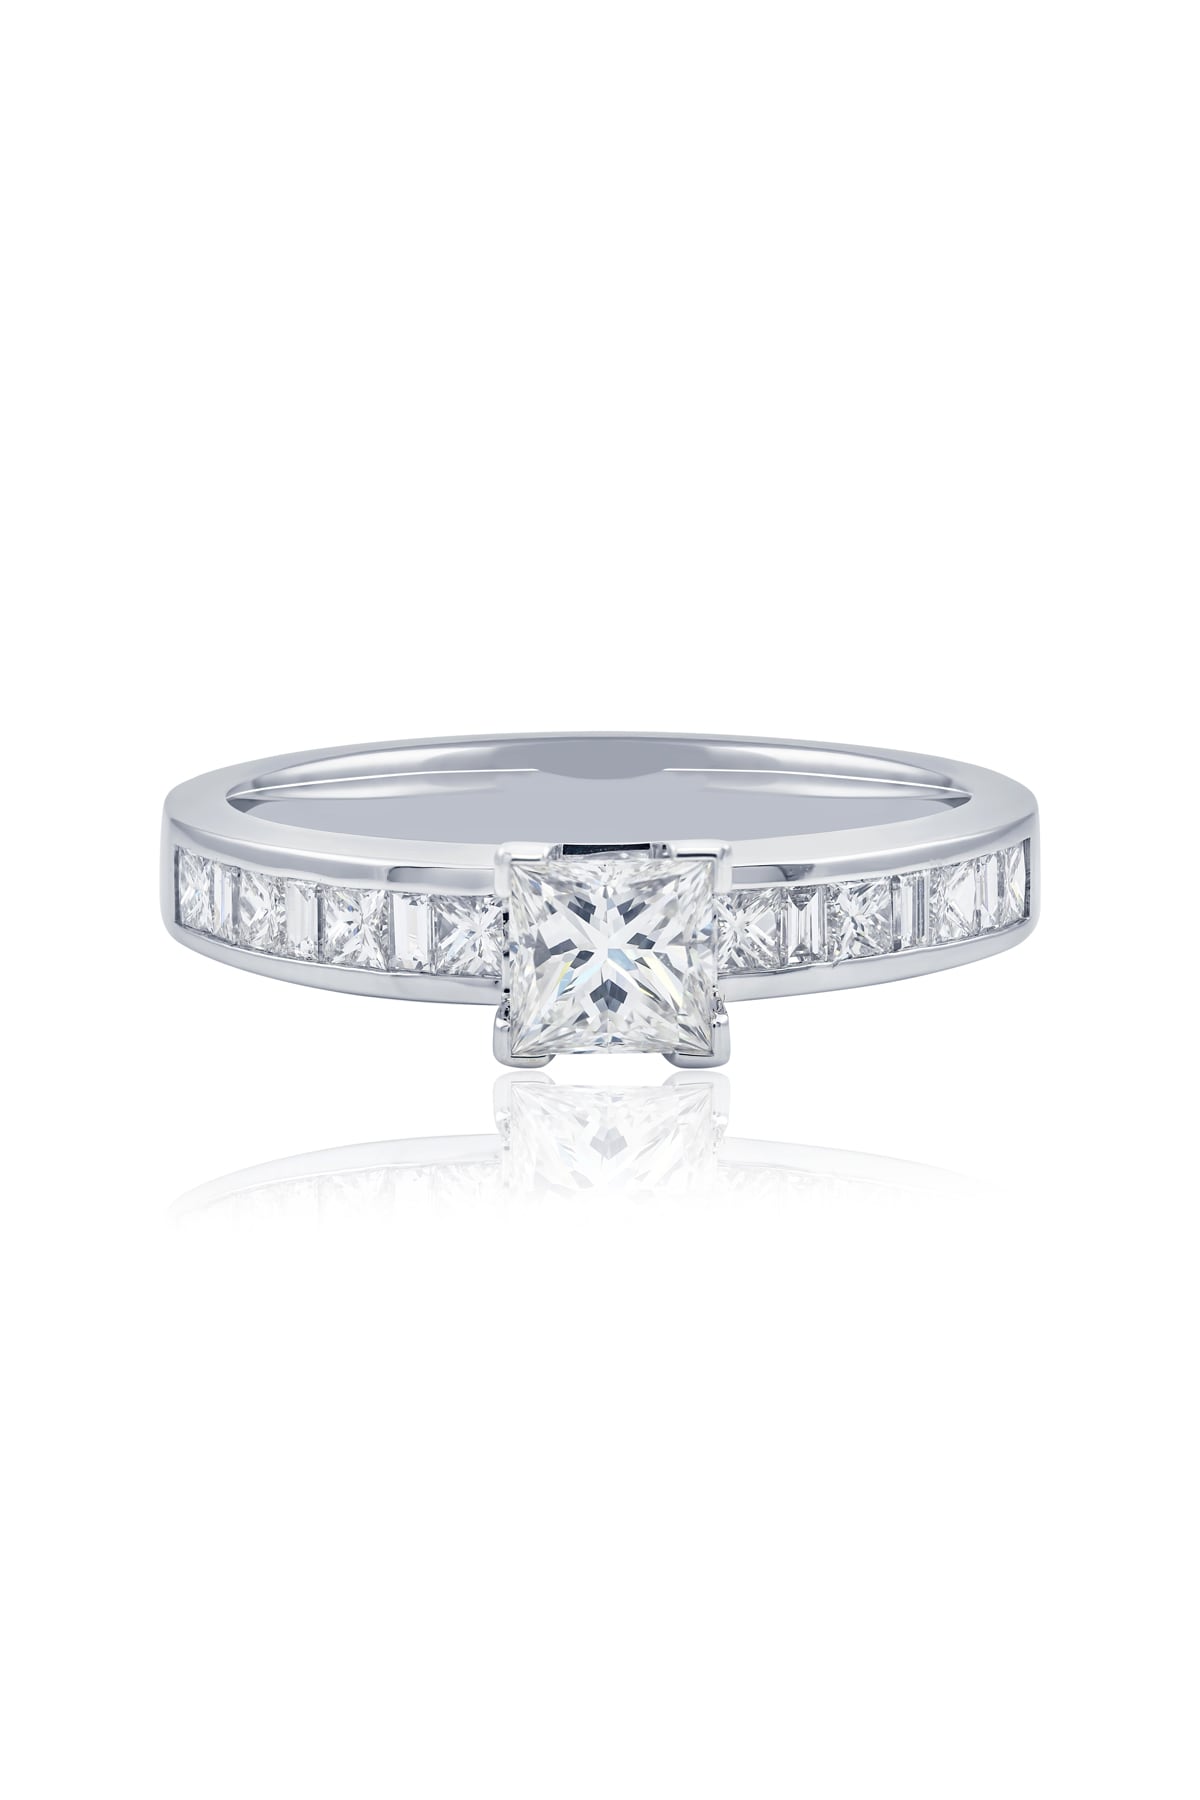 50 Point Princess Cut Engagement Ring in White Gold from LeGassick Jewellery.